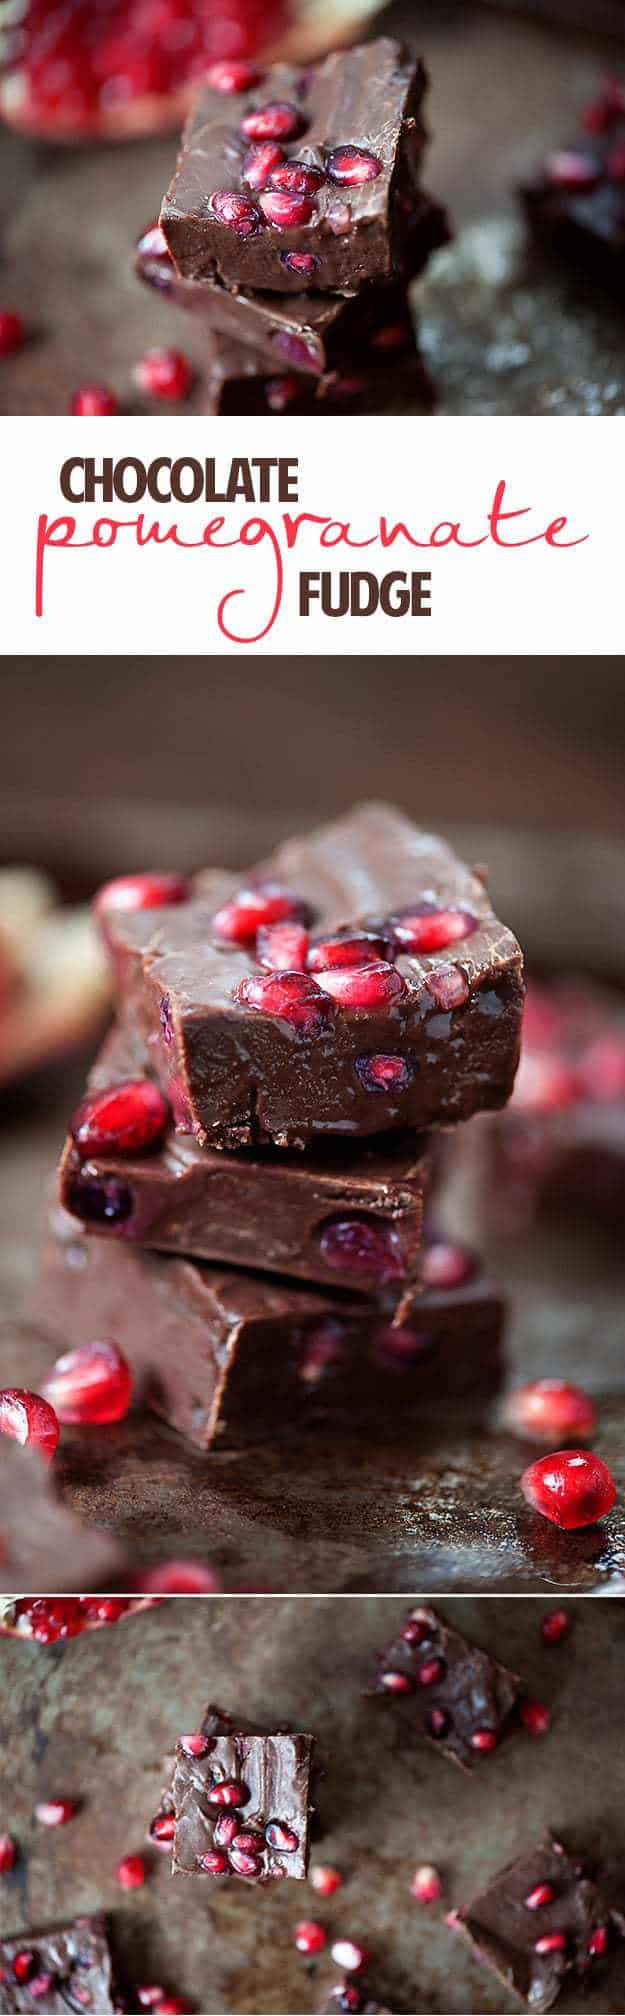 A close up of chocolate and pomegranate fudge squares on a wooden table.